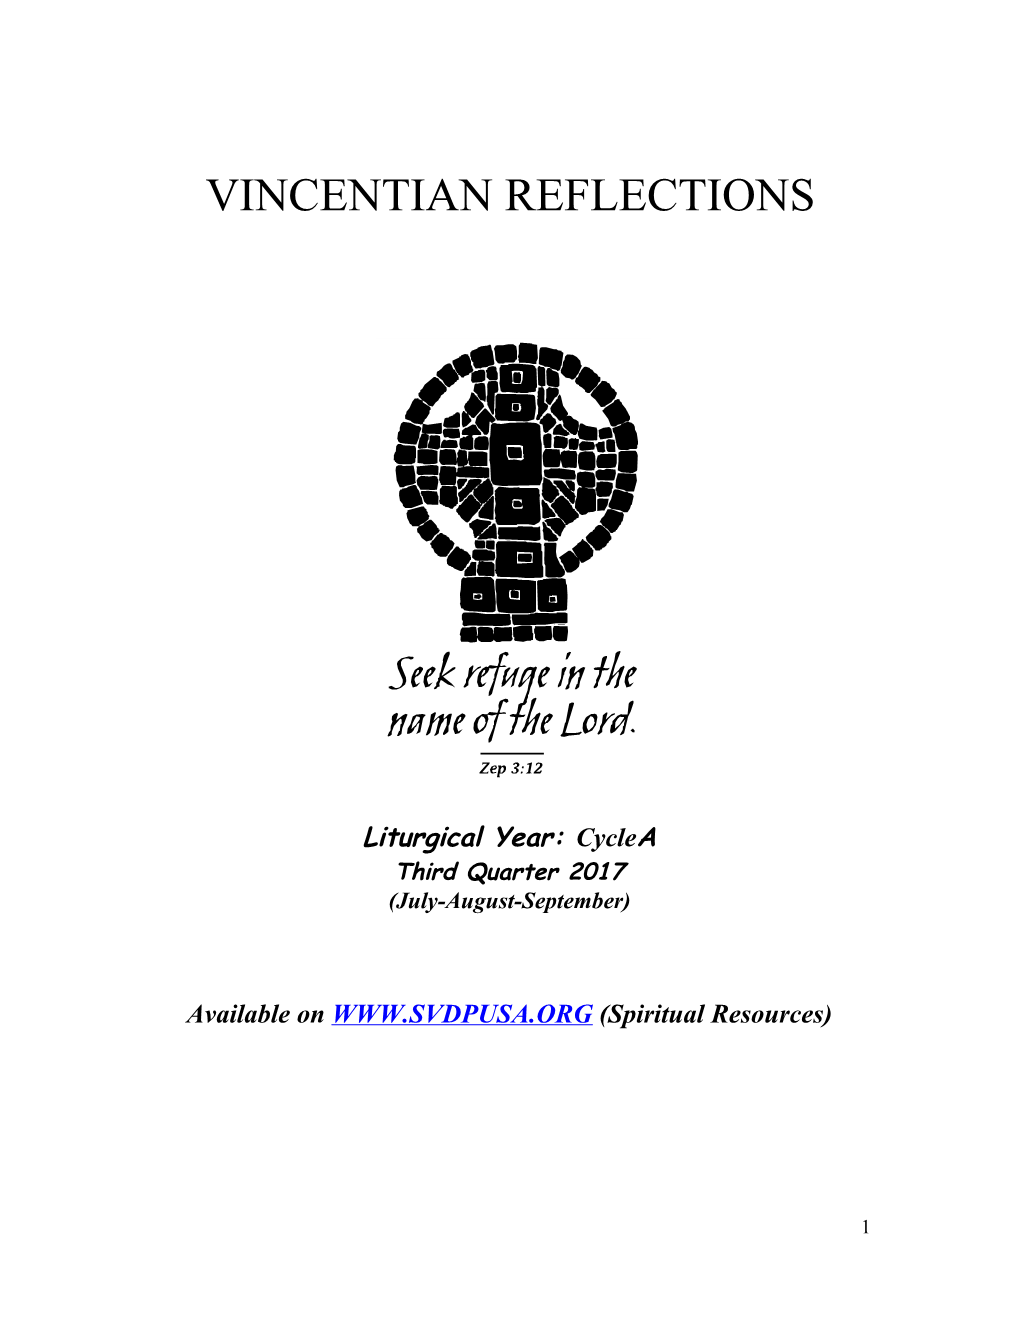 Vincentian Reflections